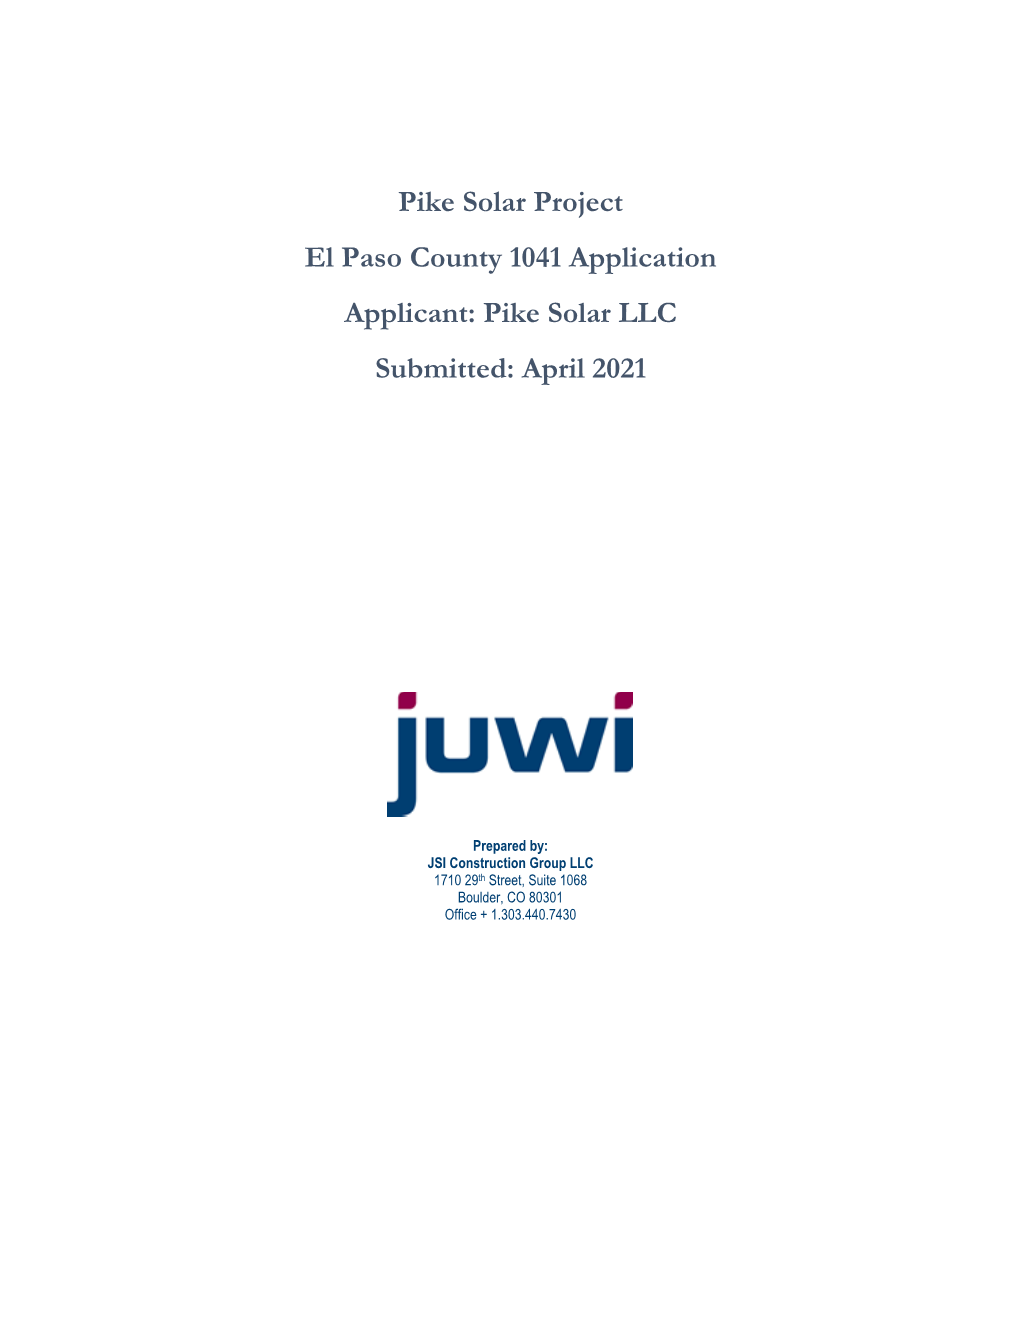 Pike Solar Project El Paso County 1041 Application Applicant: Pike Solar LLC Submitted: April 2021